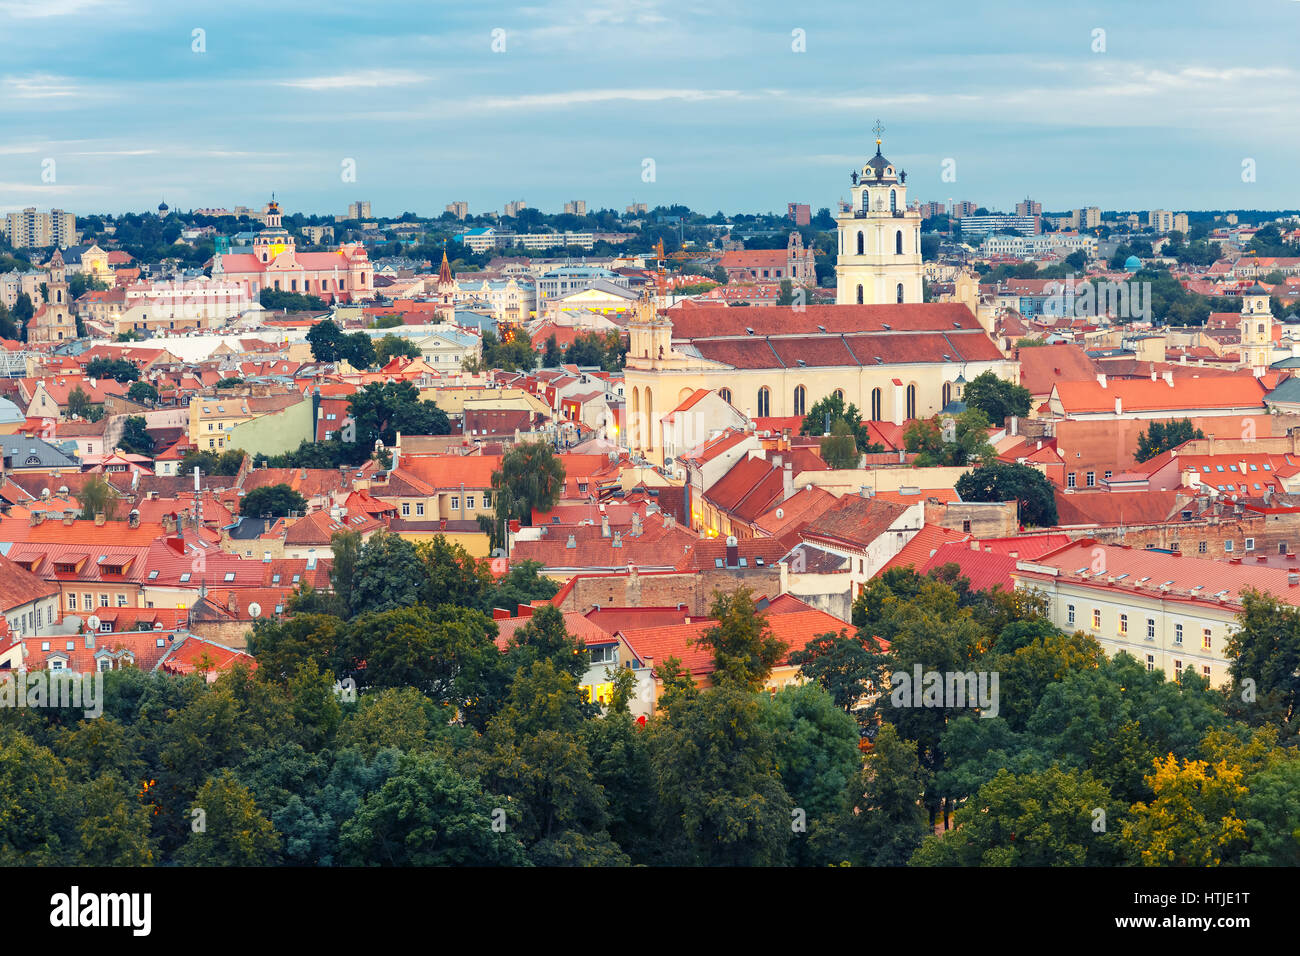 Aerial view over Old town of Vilnius, Lithuania. Stock Photo